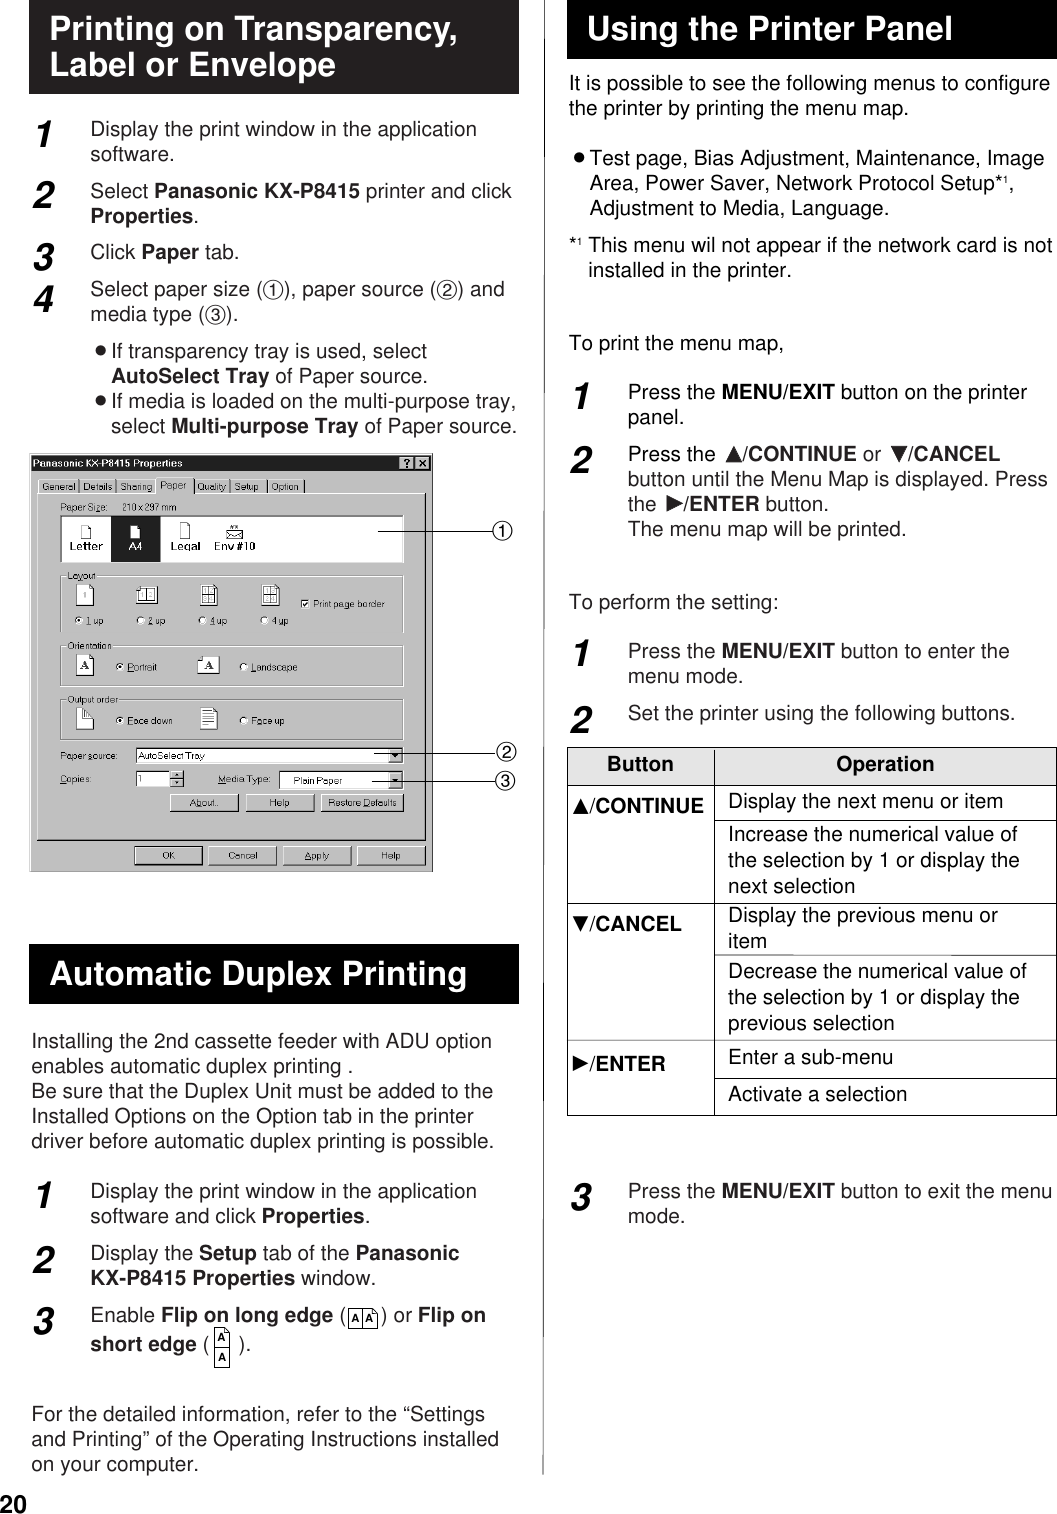 20It is possible to see the following menus to configurethe printer by printing the menu map.BTest page, Bias Adjustment, Maintenance, ImageArea, Power Saver, Network Protocol Setup*1,Adjustment to Media, Language.*1This menu wil not appear if the network card is notinstalled in the printer.To print the menu map,Press the MENU/EXIT button on the printerpanel.Press the FF/CONTINUE or GG/CANCELbutton until the Menu Map is displayed. Pressthe HH/ENTER button.The menu map will be printed.To perform the setting:Press the MENU/EXIT button to enter themenu mode.Set the printer using the following buttons.Press the MENU/EXIT button to exit the menumode.Display the print window in the applicationsoftware.Select Panasonic KX-P8415 printer and clickProperties.Click Paper tab.Select paper size (#), paper source ($) andmedia type (%).BIf transparency tray is used, selectAutoSelect Tray of Paper source.BIf media is loaded on the multi-purpose tray,select Multi-purpose Tray of Paper source.Installing the 2nd cassette feeder with ADU optionenables automatic duplex printing .Be sure that the Duplex Unit must be added to theInstalled Options on the Option tab in the printerdriver before automatic duplex printing is possible.Display the print window in the applicationsoftware and click Properties.Display the Setup tab of the Panasonic KX-P8415 Properties window.Enable Flip on long edge (      ) or Flip onshort edge (     ).For the detailed information, refer to the “Settingsand Printing” of the Operating Instructions installedon your computer.Printing on Transparency,Label or Envelope2341$#%311223AAAA12Button OperationDisplay the next menu or itemG/CANCELIncrease the numerical value ofthe selection by 1 or display thenext selectionF/CONTINUEDisplay the previous menu oritemDecrease the numerical value ofthe selection by 1 or display theprevious selectionEnter a sub-menuActivate a selectionH/ENTERUsing the Printer PanelAutomatic Duplex Printing